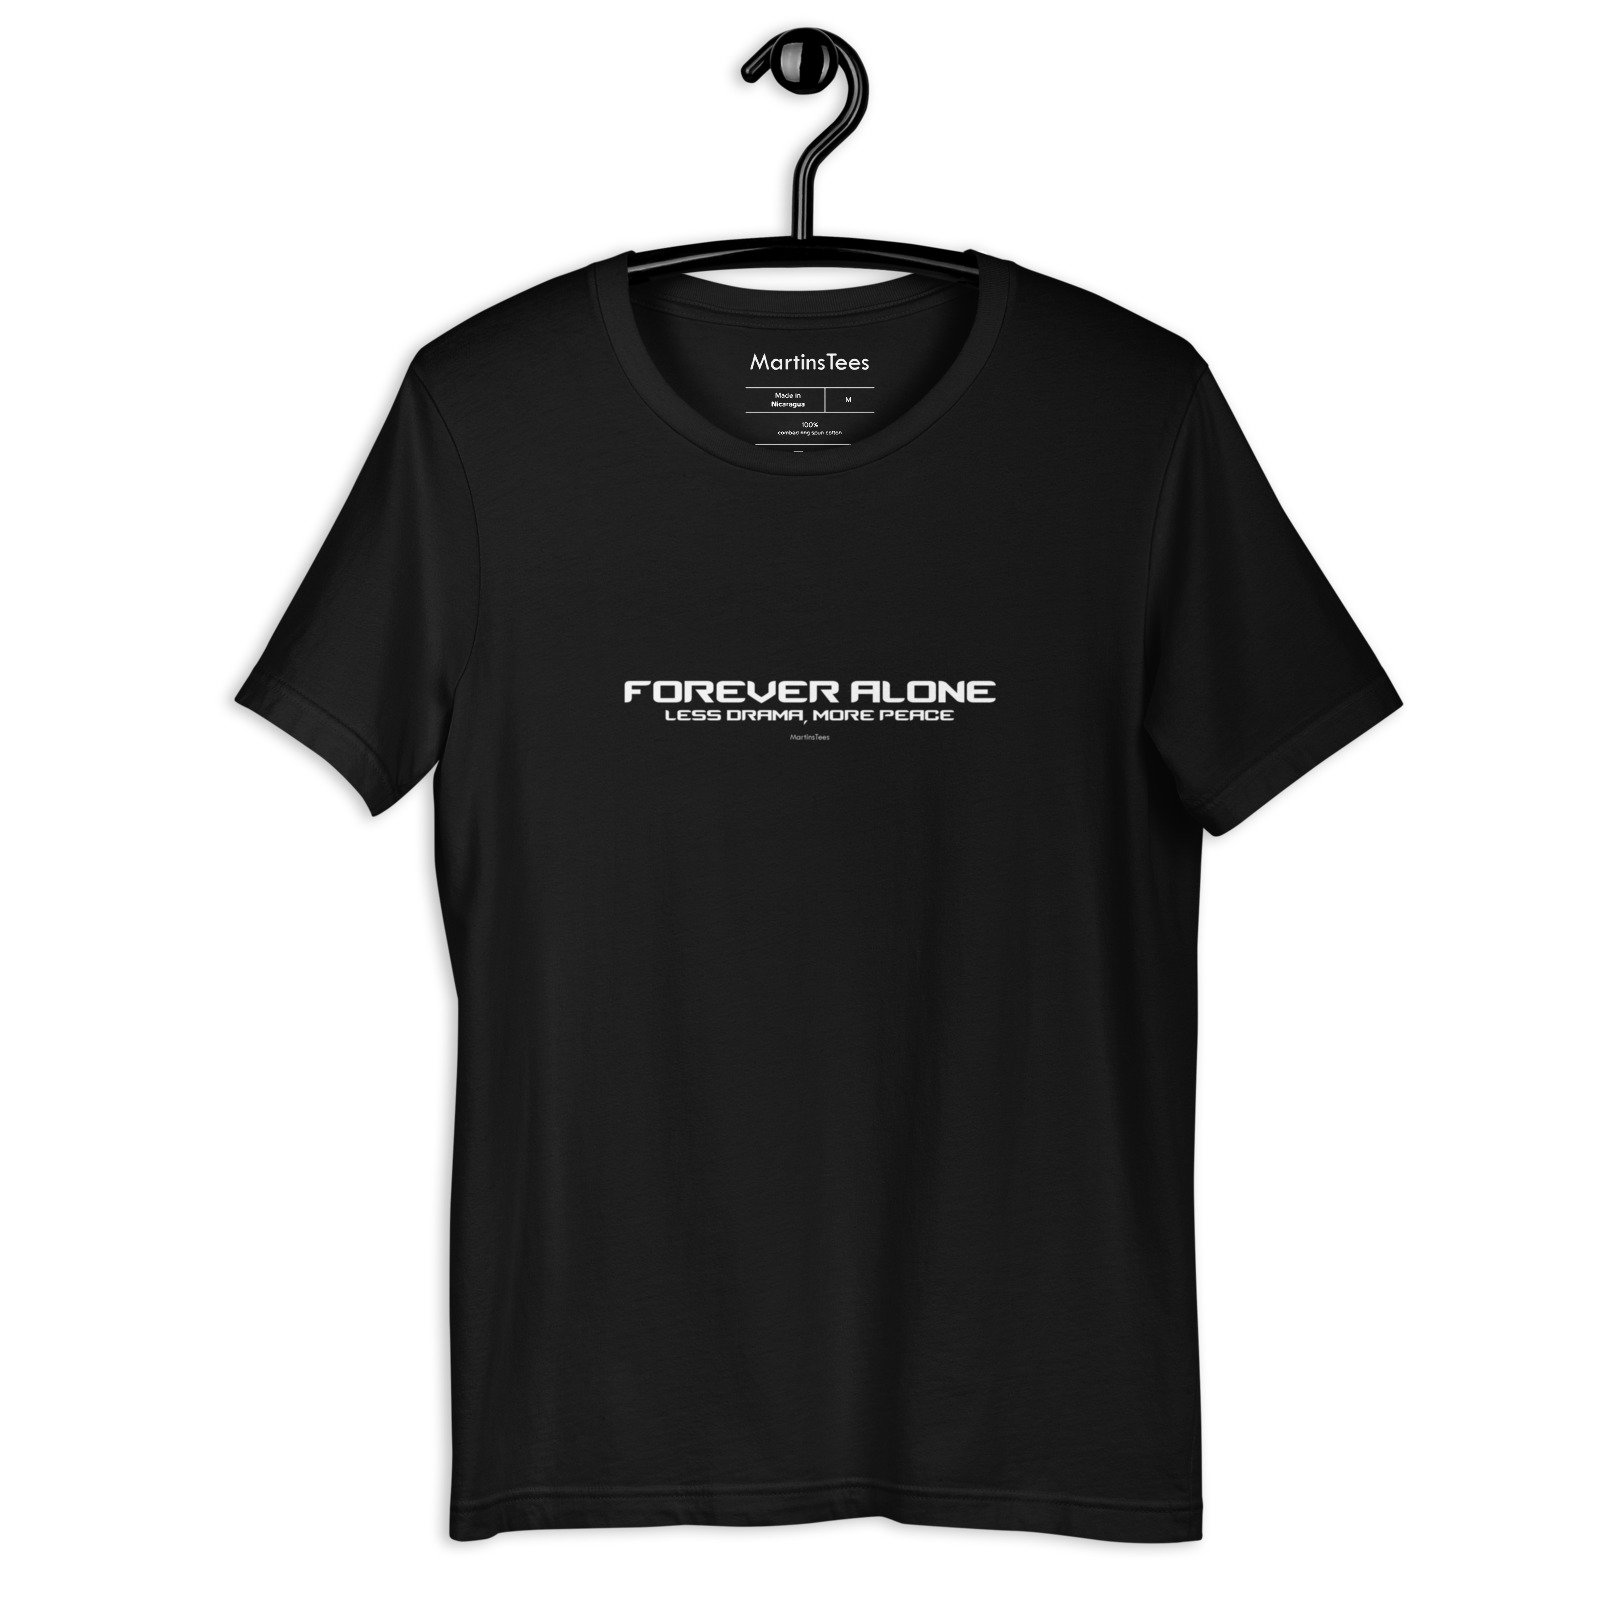 T-shirt: FOREVER ALONE - LESS DRAMA, MORE PEACE